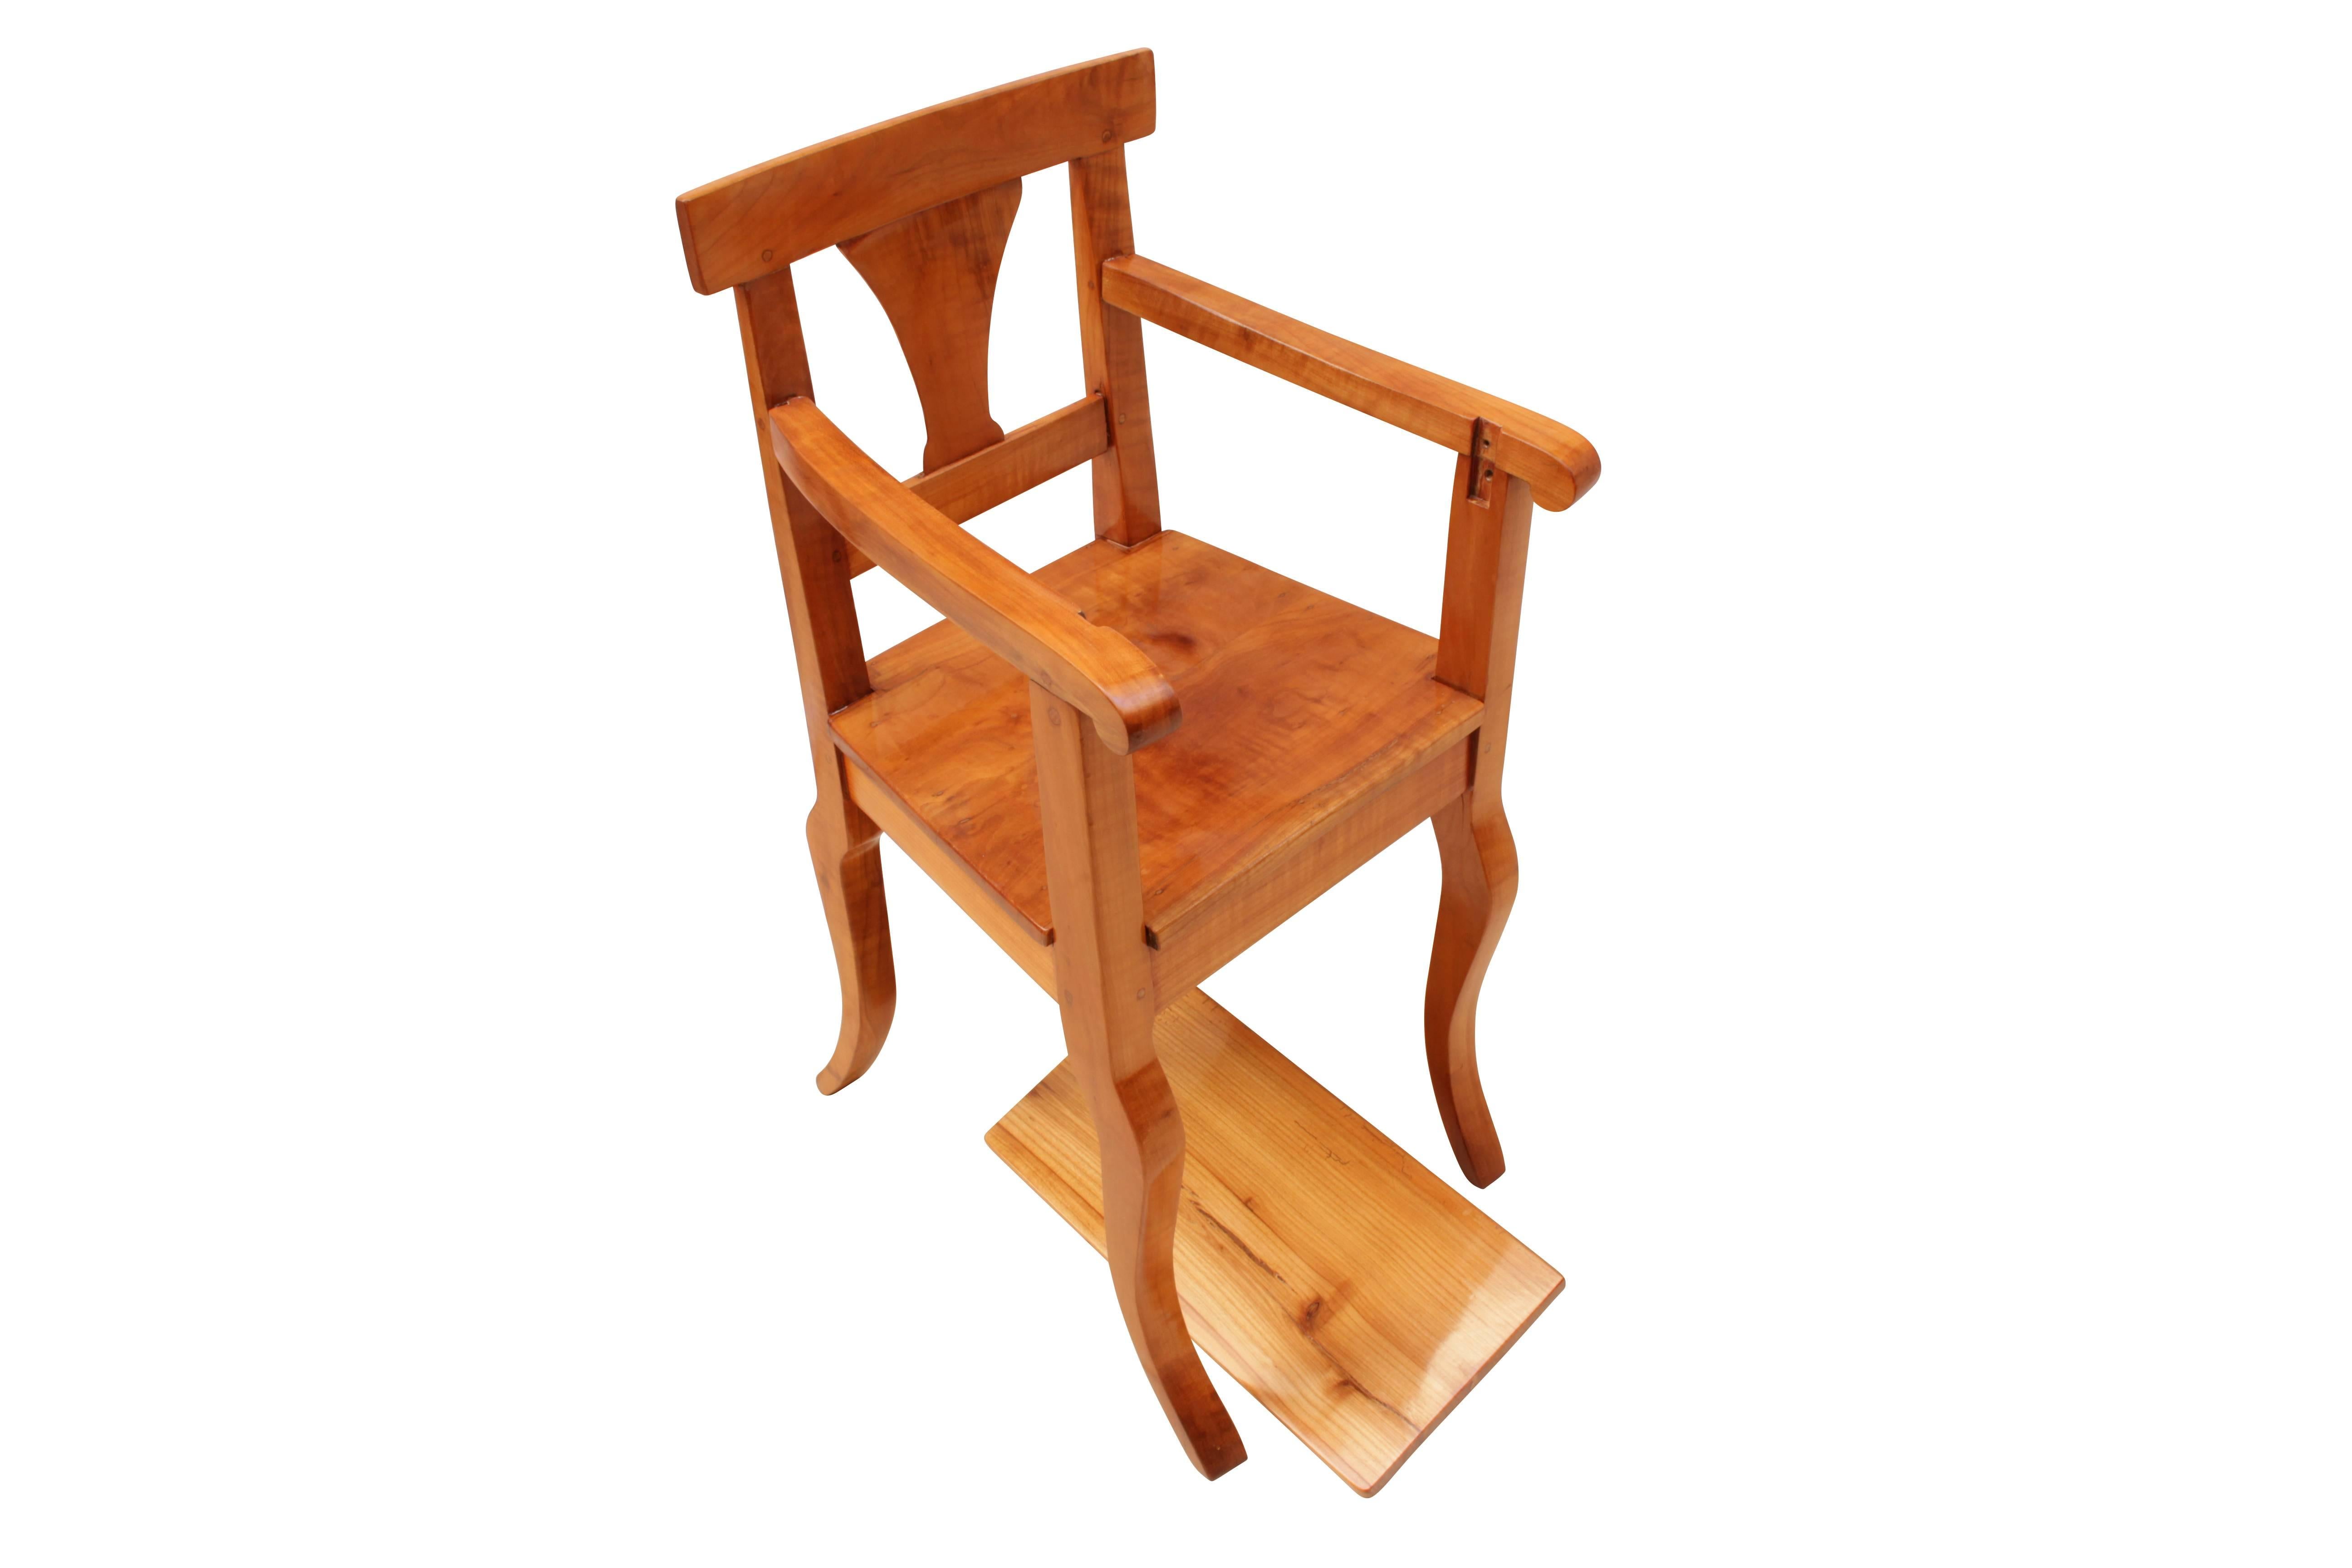 A small high chair from the time of Biedermeier, circa 1830. The chair is made of solid cherry. The small tray can easily be pulled upwards. An absolute rarity. In very good restored condition.
Measure: Seat height 42cm.